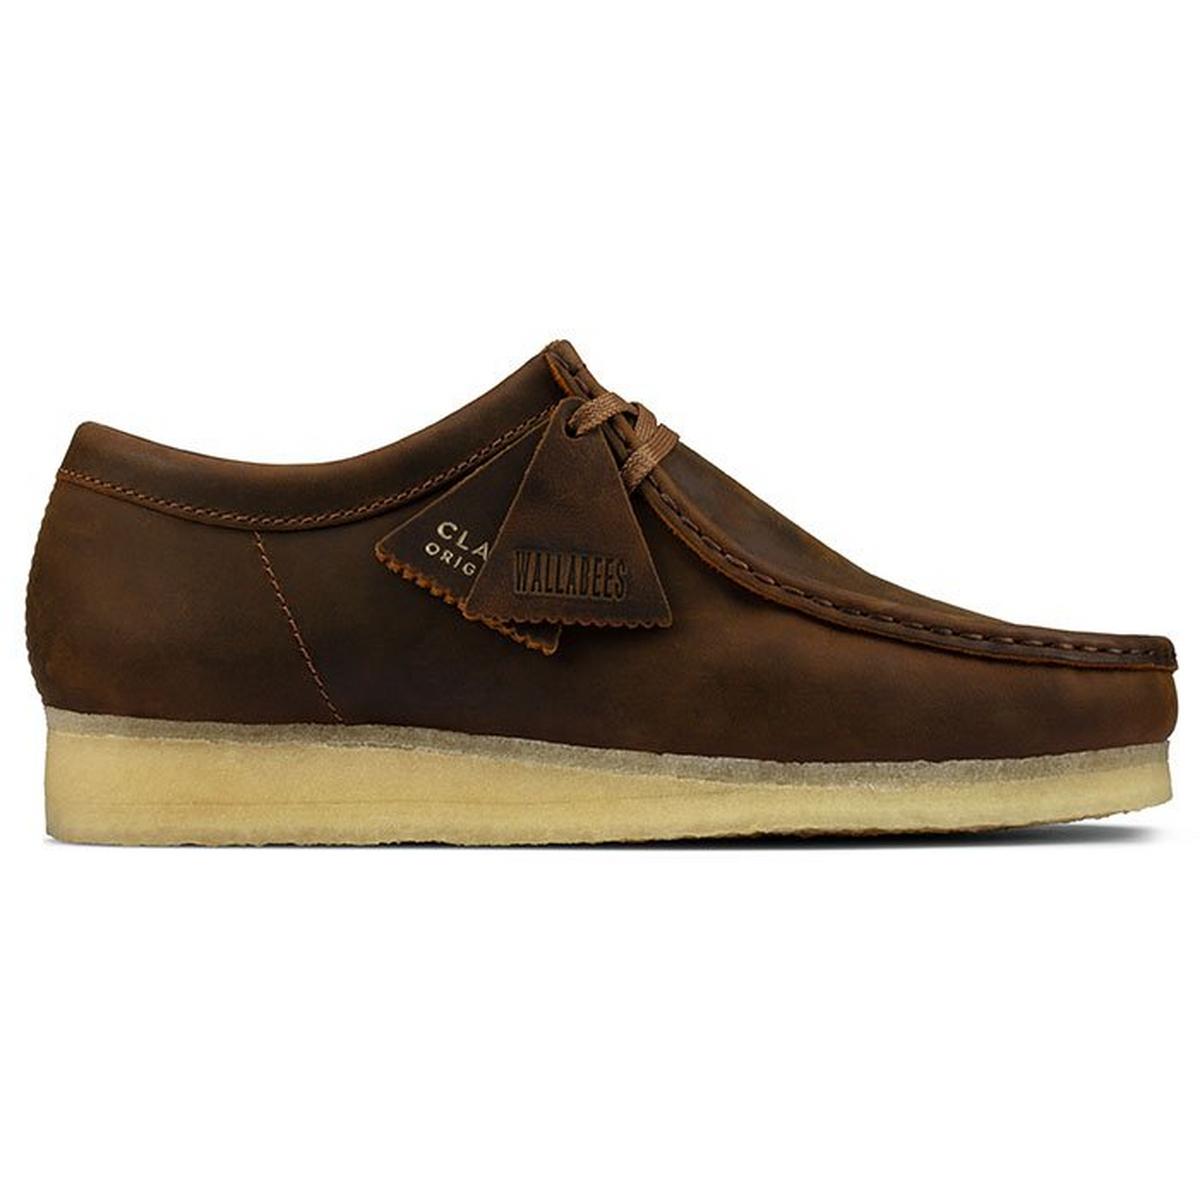 Chaussures Wallabee pour hommes